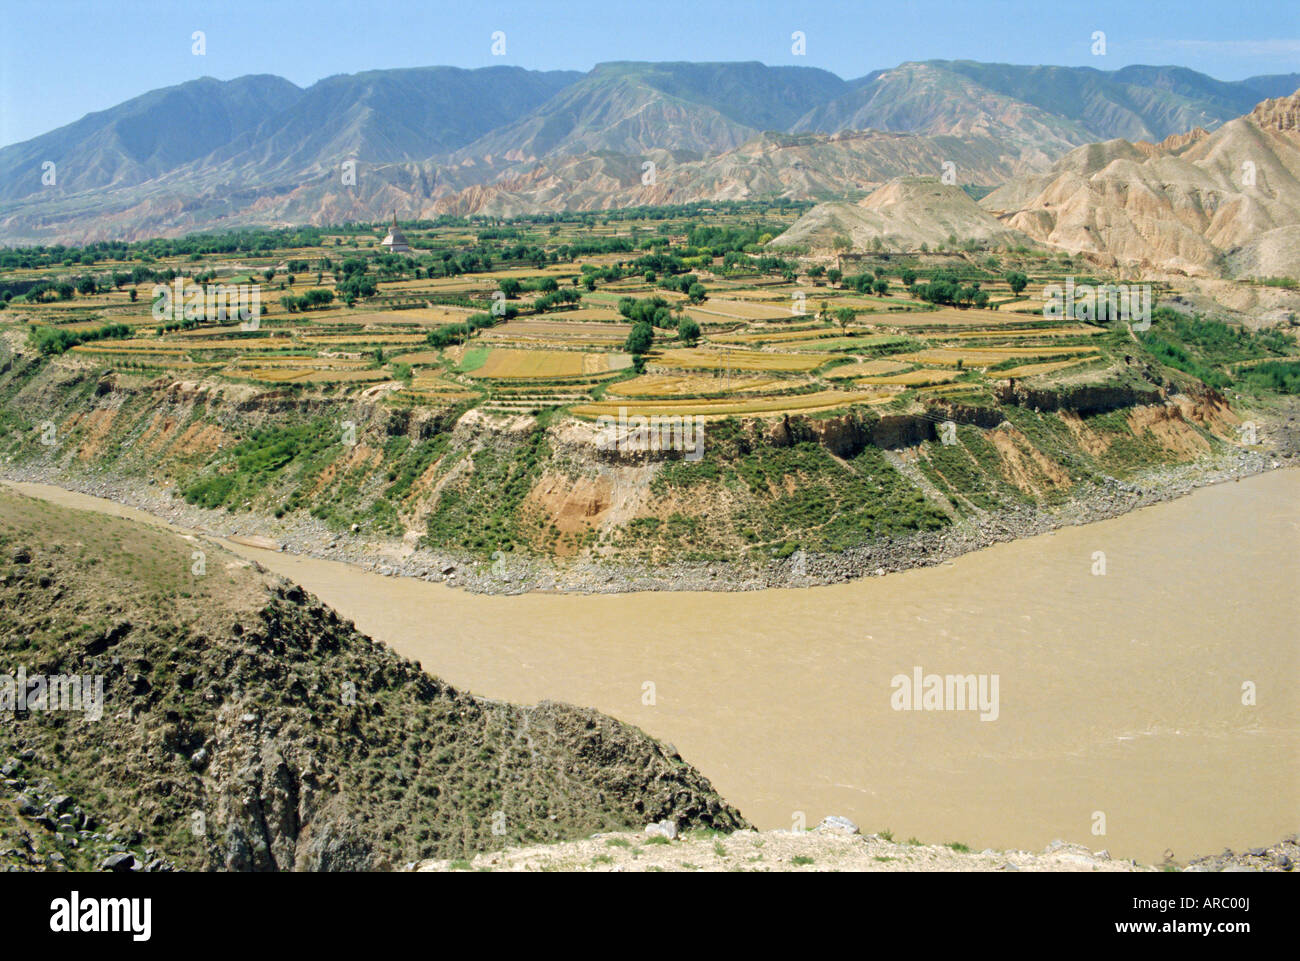 Hwang Ho, the Yellow River, in Qinghai Province, China Stock Photo